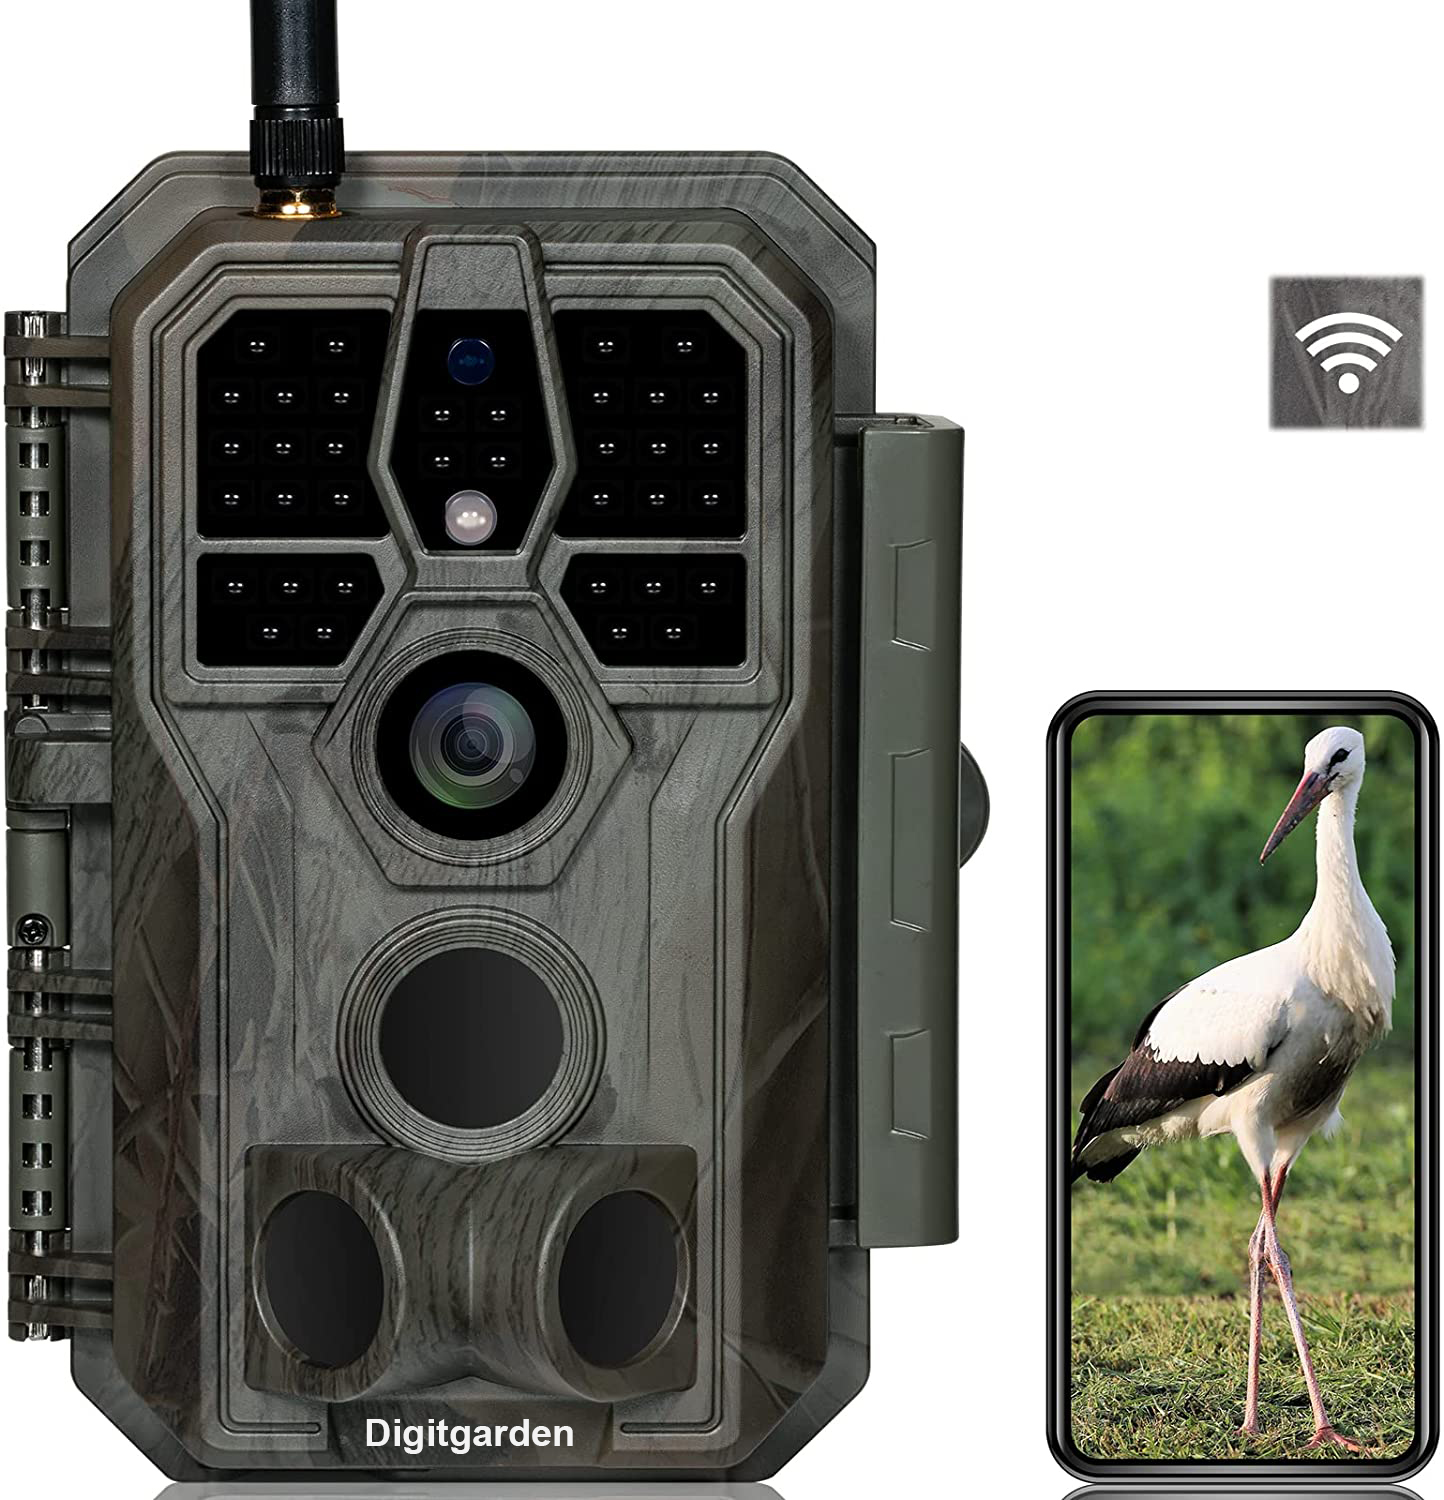 Digitgarden Trail Camera Wi-Fi 32MP 1296P Fast 0.1S Trigger Speed Motion Activated 100ft Night Vision IP66 Waterproof